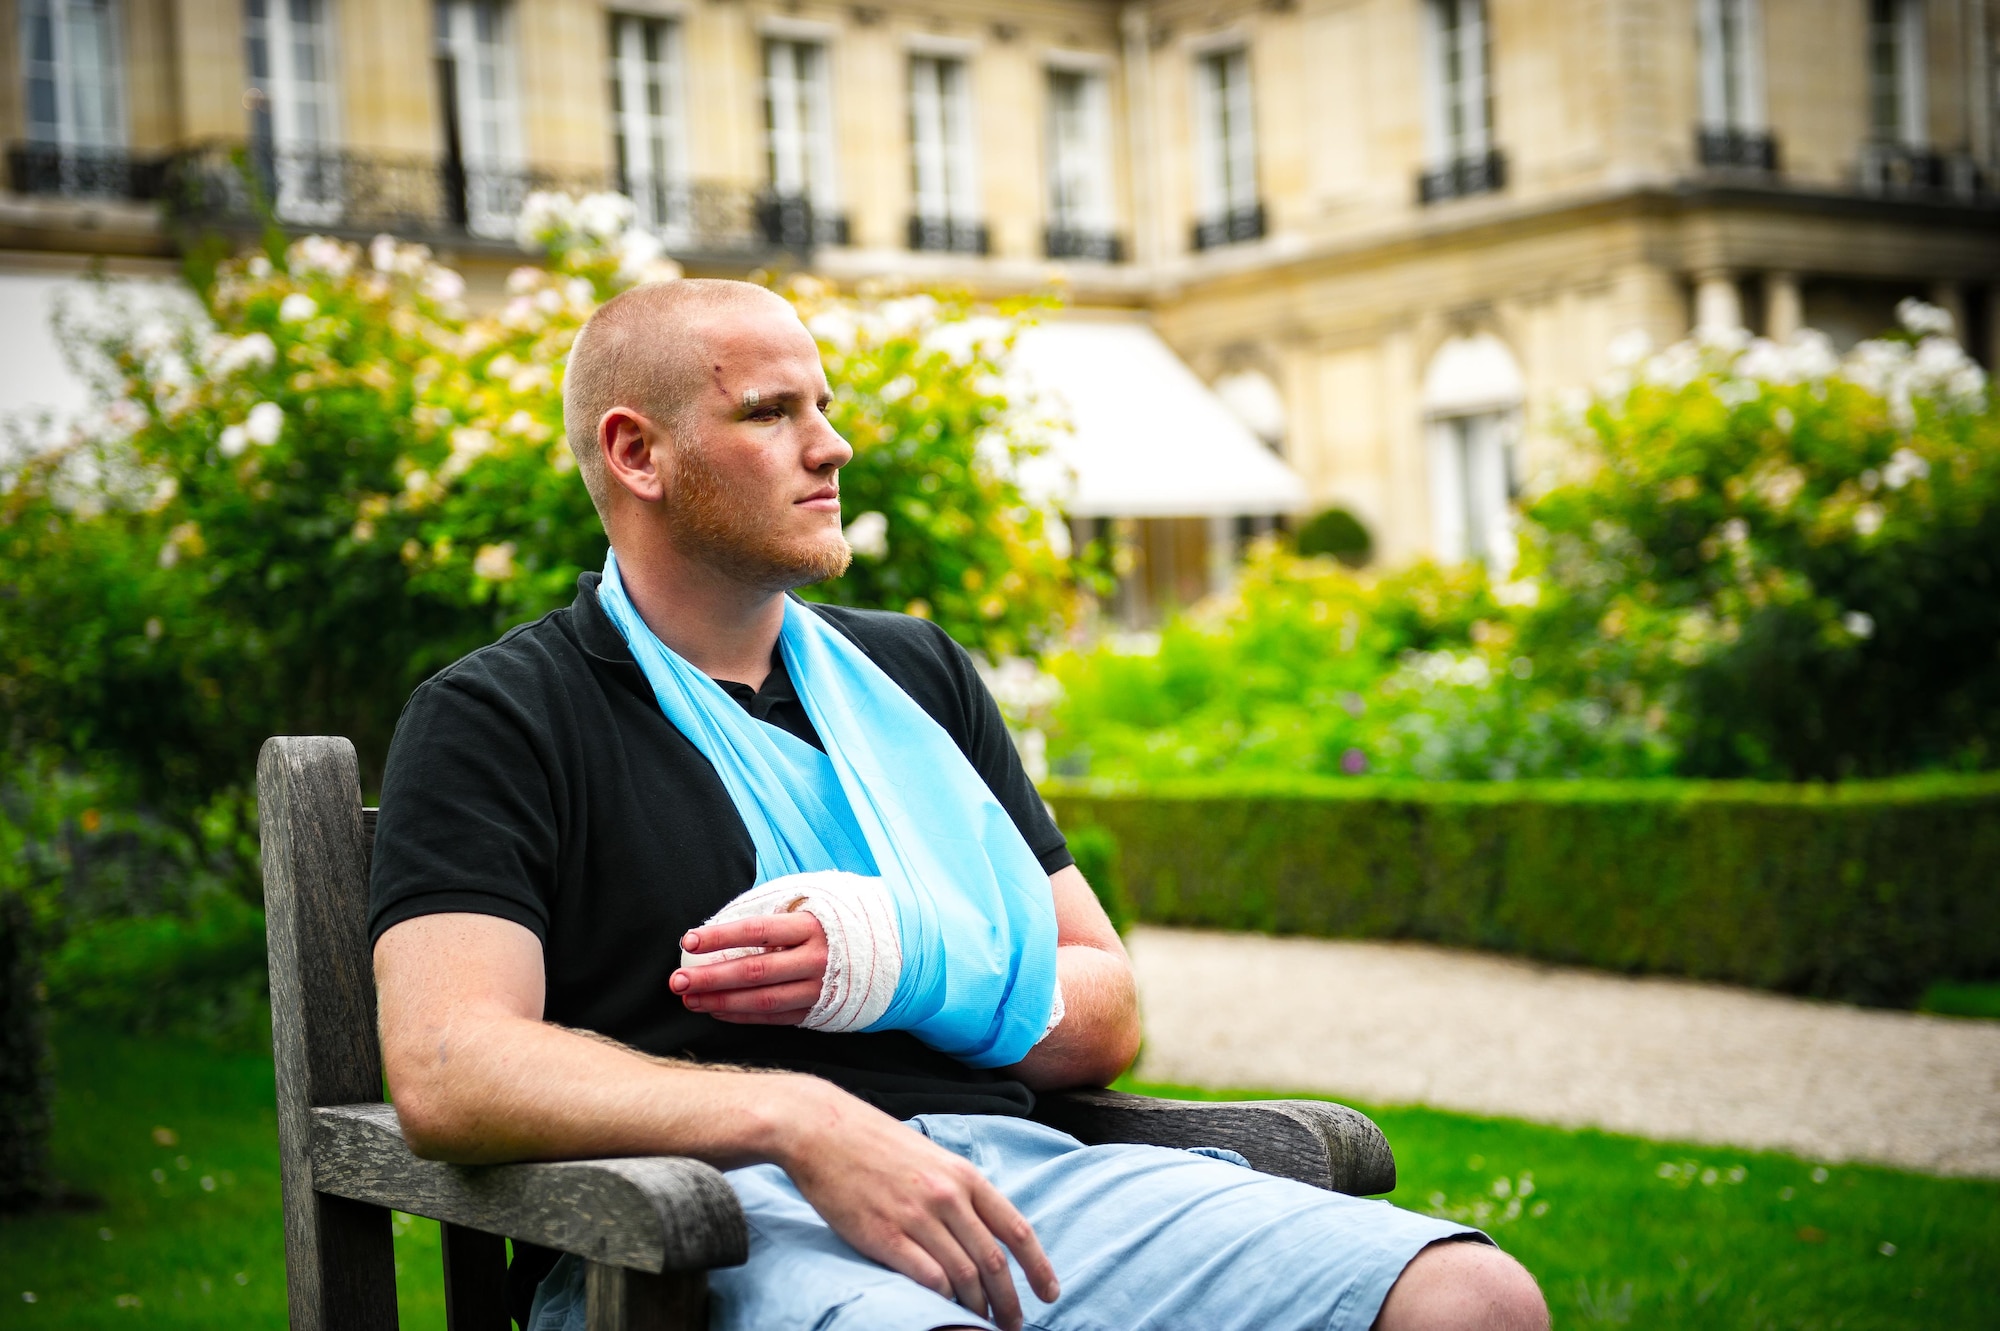 Airman 1st Class Spencer Stone along with Jane D. Hartly,  the U.S. ambassador to France, and his two friends speak at a press conference in Paris Aug. 23, 2015, following a foiled attack on a French train. Stone was on vacation with his childhood friends, Aleksander Skarlatos and Anthony Sadler, when an armed gunman entered their train carrying an assault rifle, a handgun and a box cutter. The three friends, with the help of a British passenger, subdued the gunman after his rifle jammed. Stone’s medical background prepared him to begin treating wounded passengers while waiting for the authorities to arrive. Stone is an ambulance service technician assigned to the 65th Medical Operations Squadron stationed at Lajes Field, Azores. (U.S. Air Force photo/Tech. Sgt. Ryan Crane)
